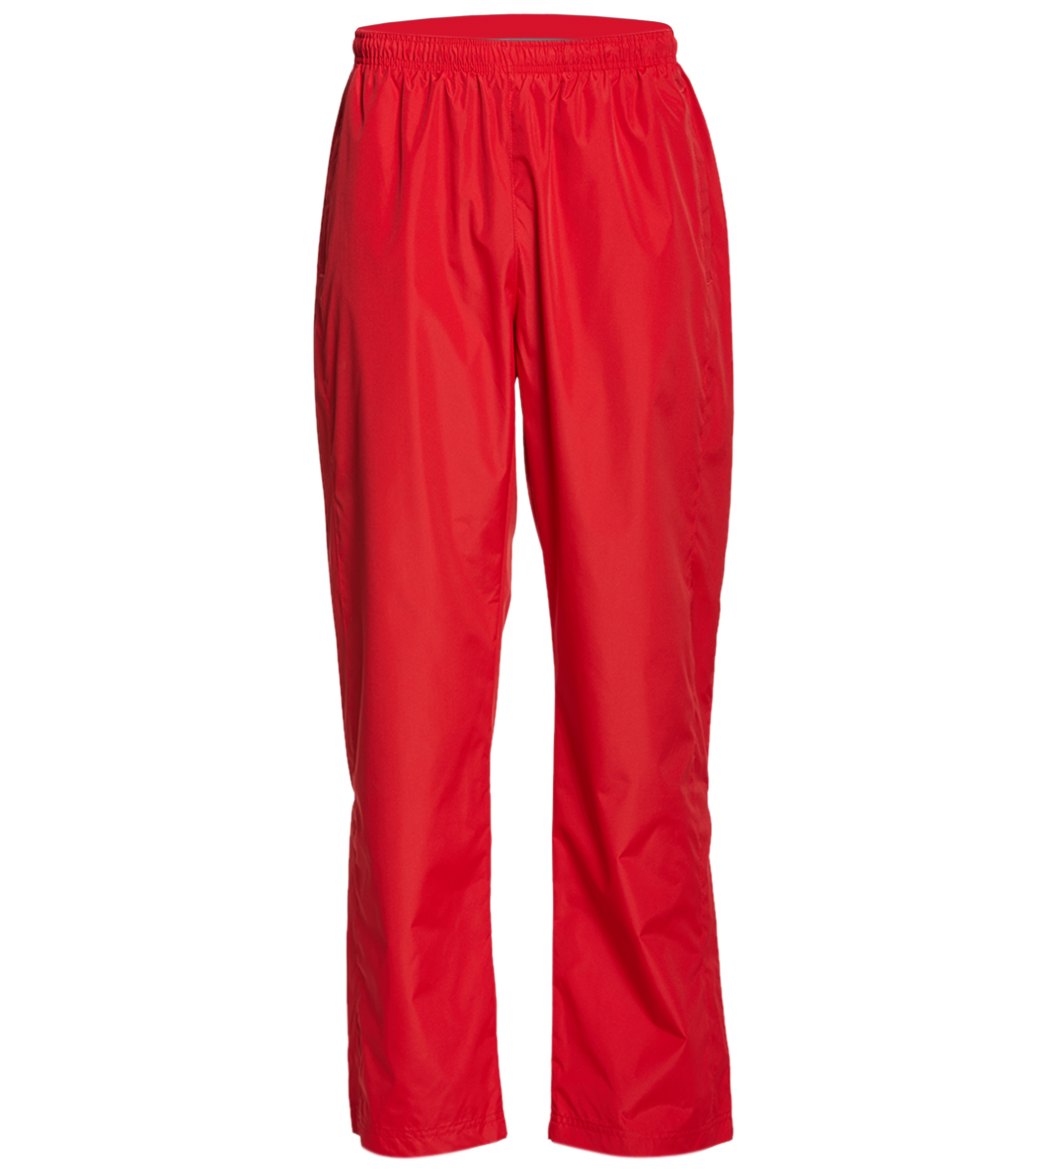 Women's Warm Up Pants - True Red 2Xl Polyester - Swimoutlet.com